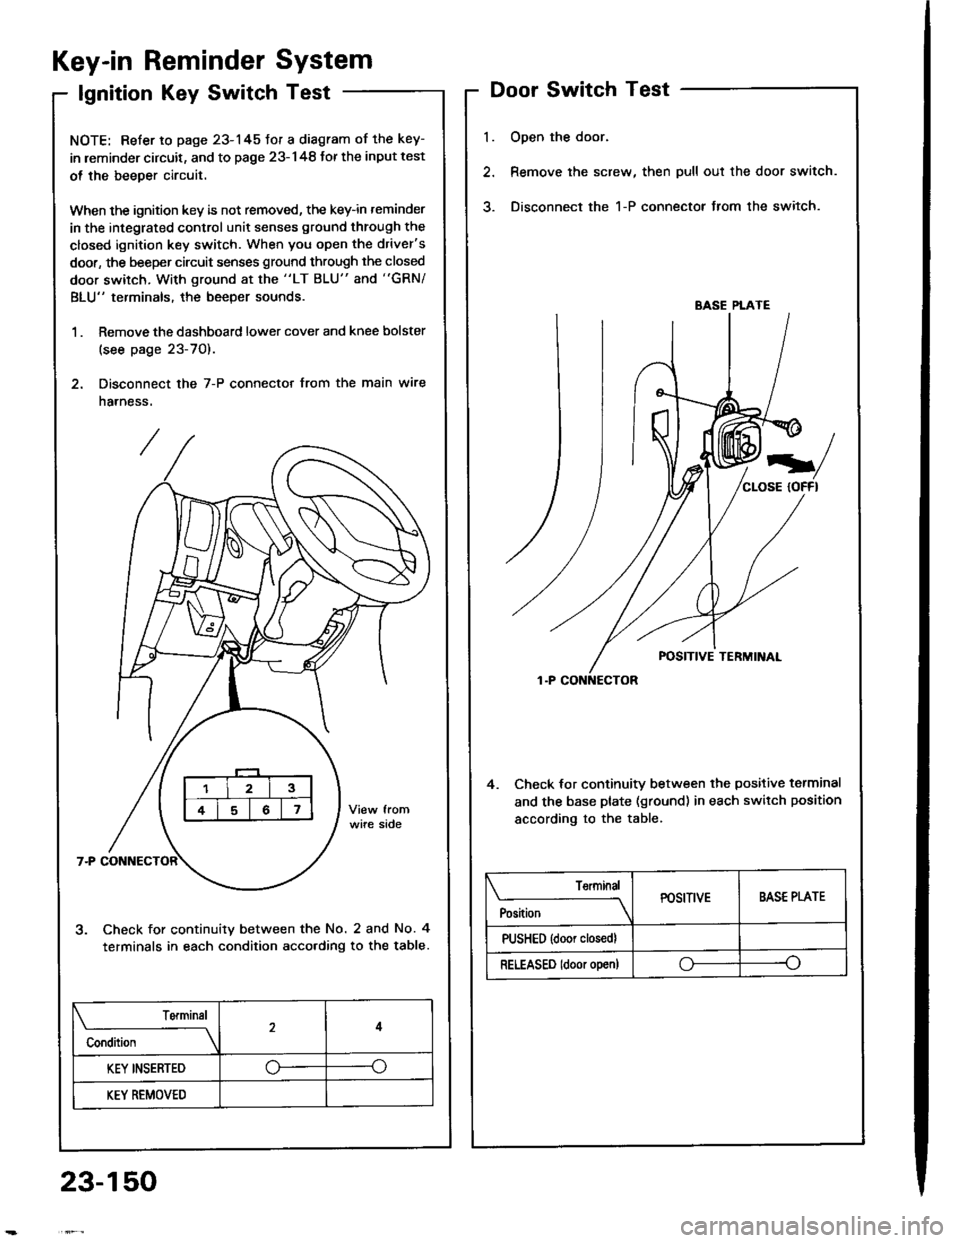 HONDA INTEGRA 1994 4.G User Guide Key-in Reminder System
lgnition Key Switch Test
NOTE: Refer to page 23-145fot a diagram of the key-
in leminder circuit, and to page 23-148 Jor the input test
ol the beeper circuit.
When the ignition 